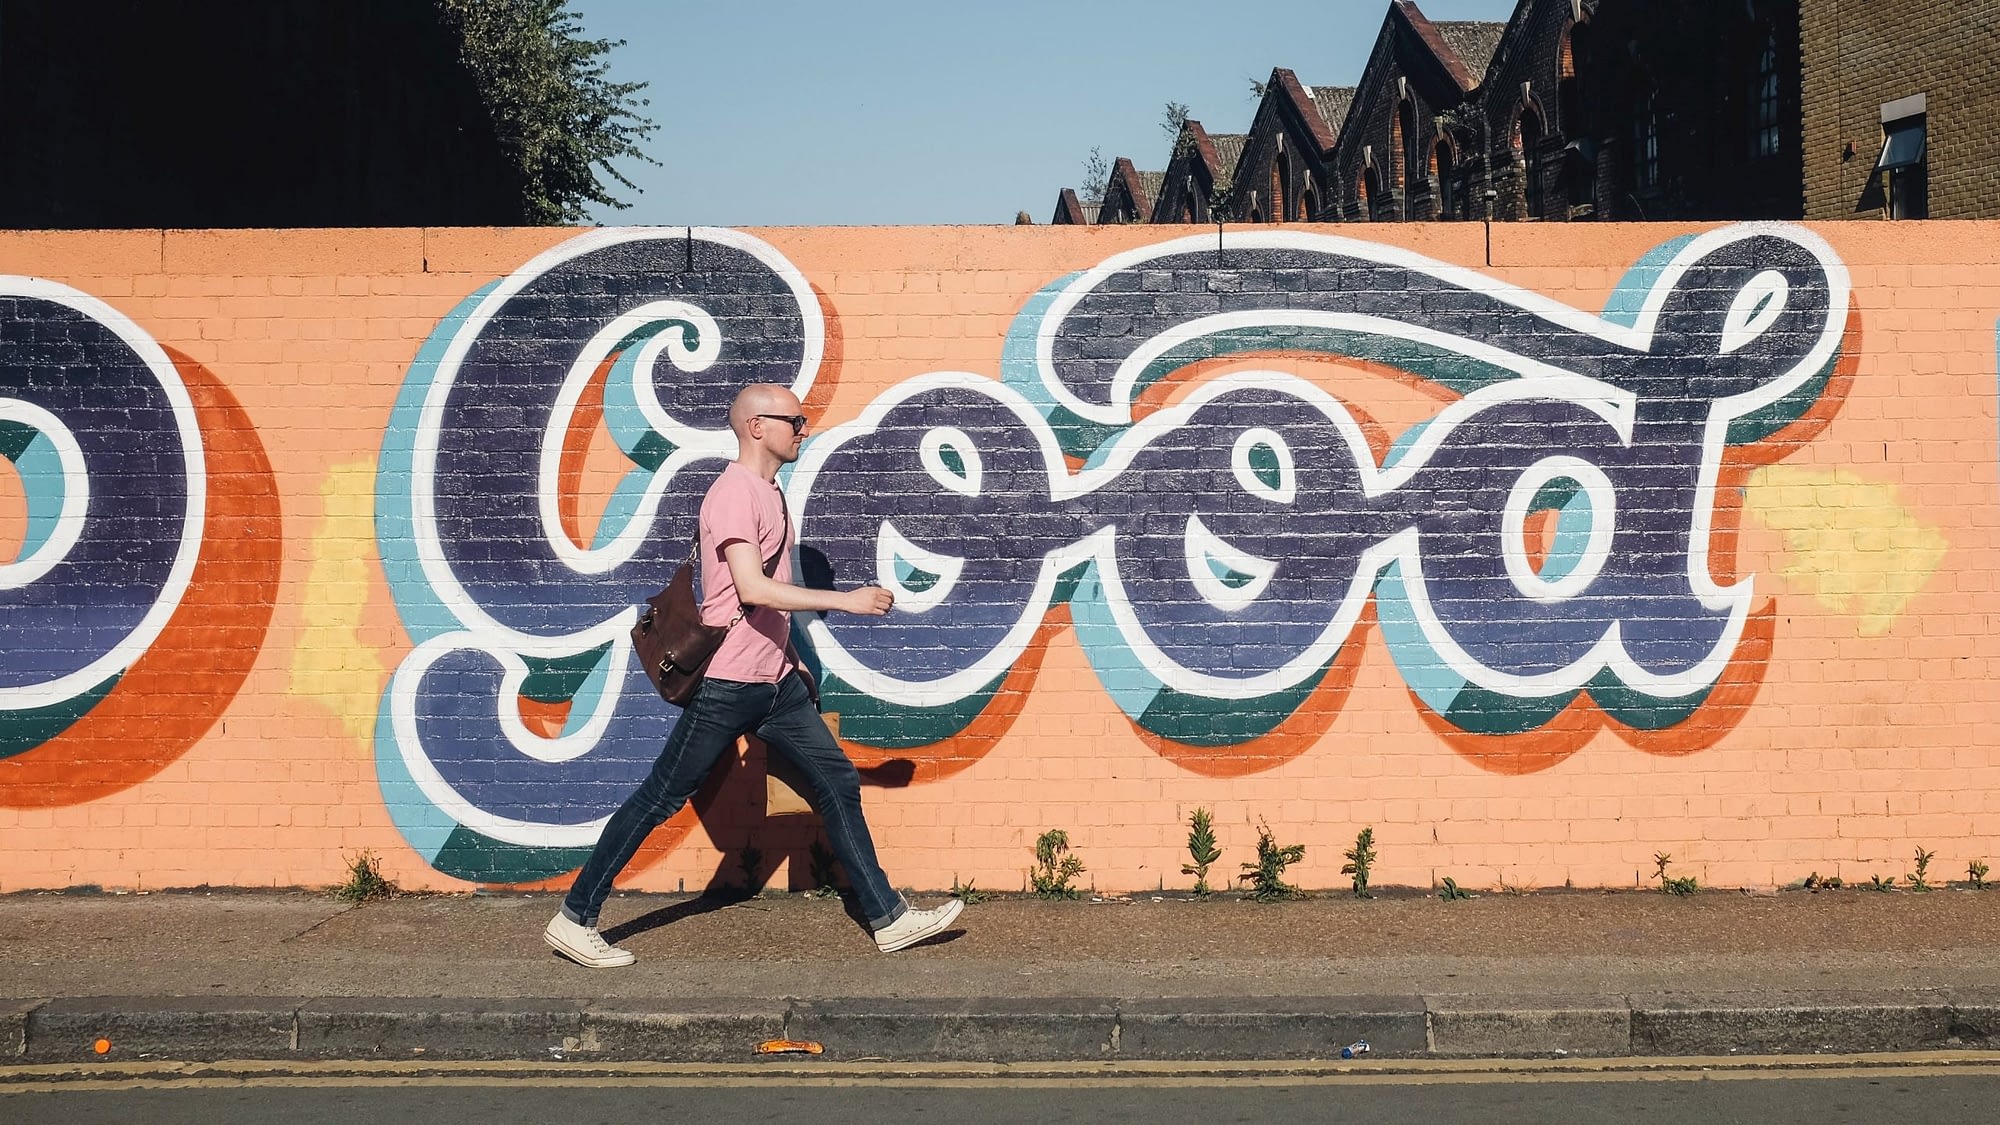 Image: A man walking down a side walk in front of an orange mural with blue writing that says "Good", using street wisdom practices.